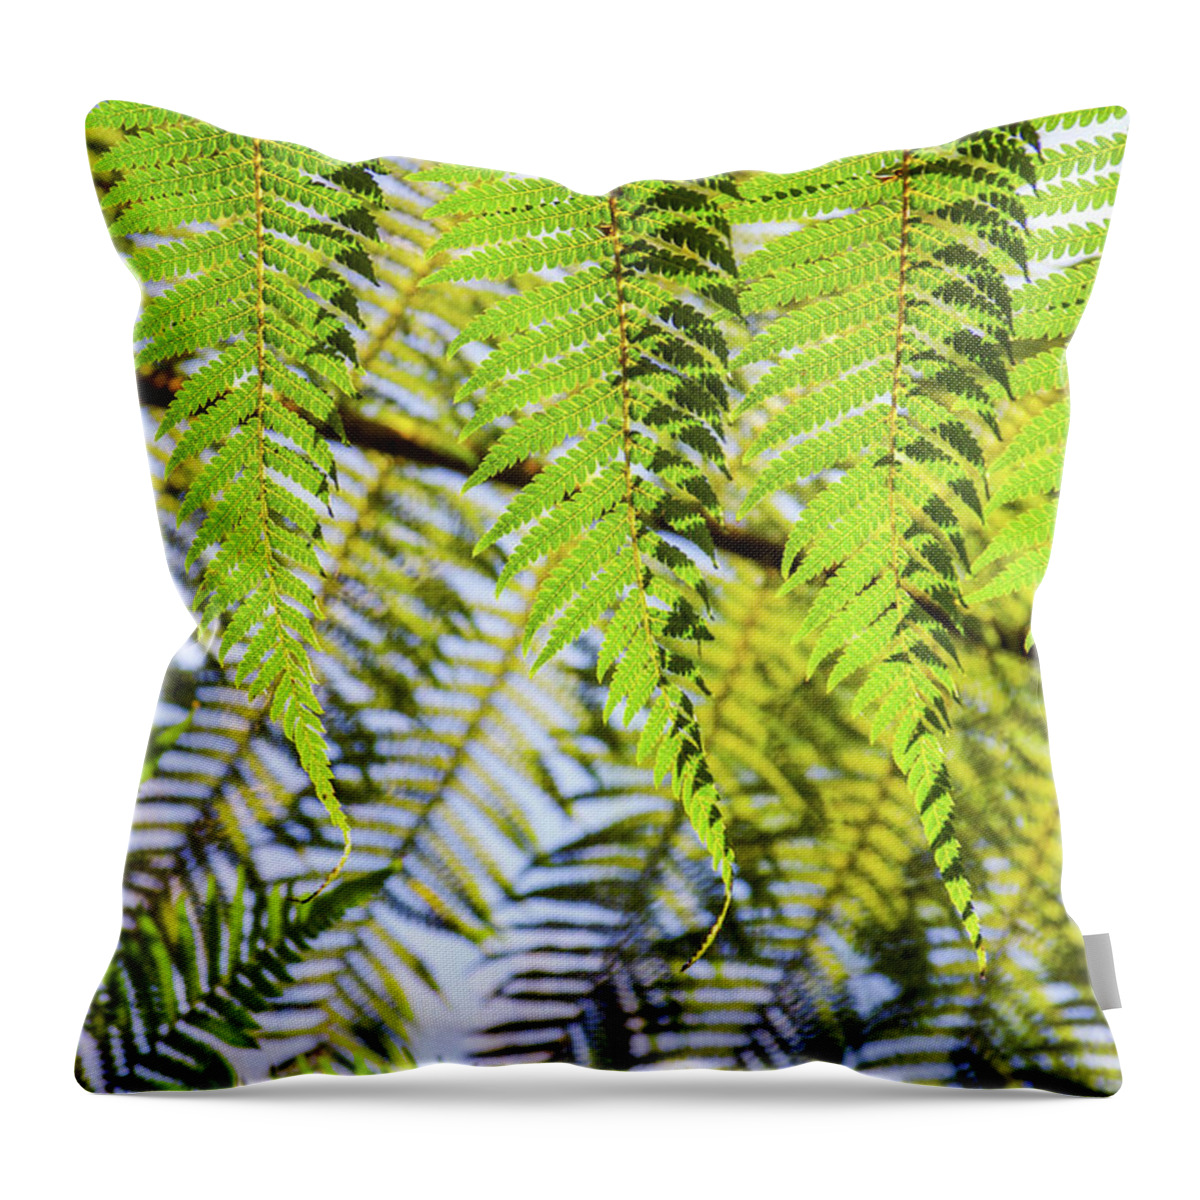 Green Plants Throw Pillow featuring the photograph Green Fern by Carlos Caetano